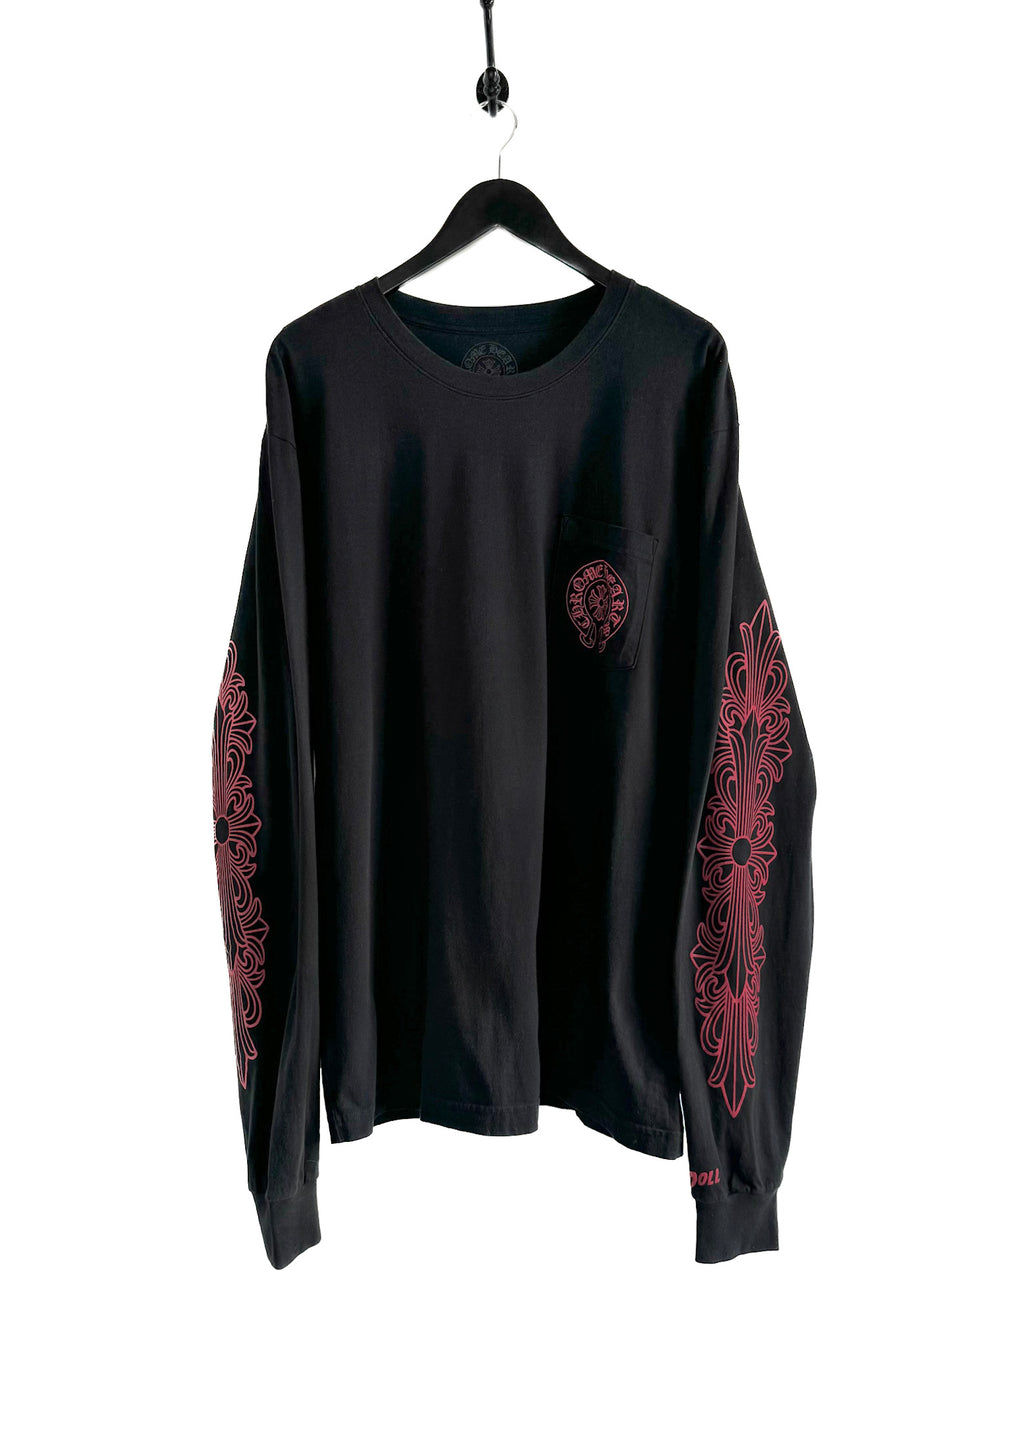 Chrome Hearts X Deadly Doll Fire of Love Long Sleeves T-shirt